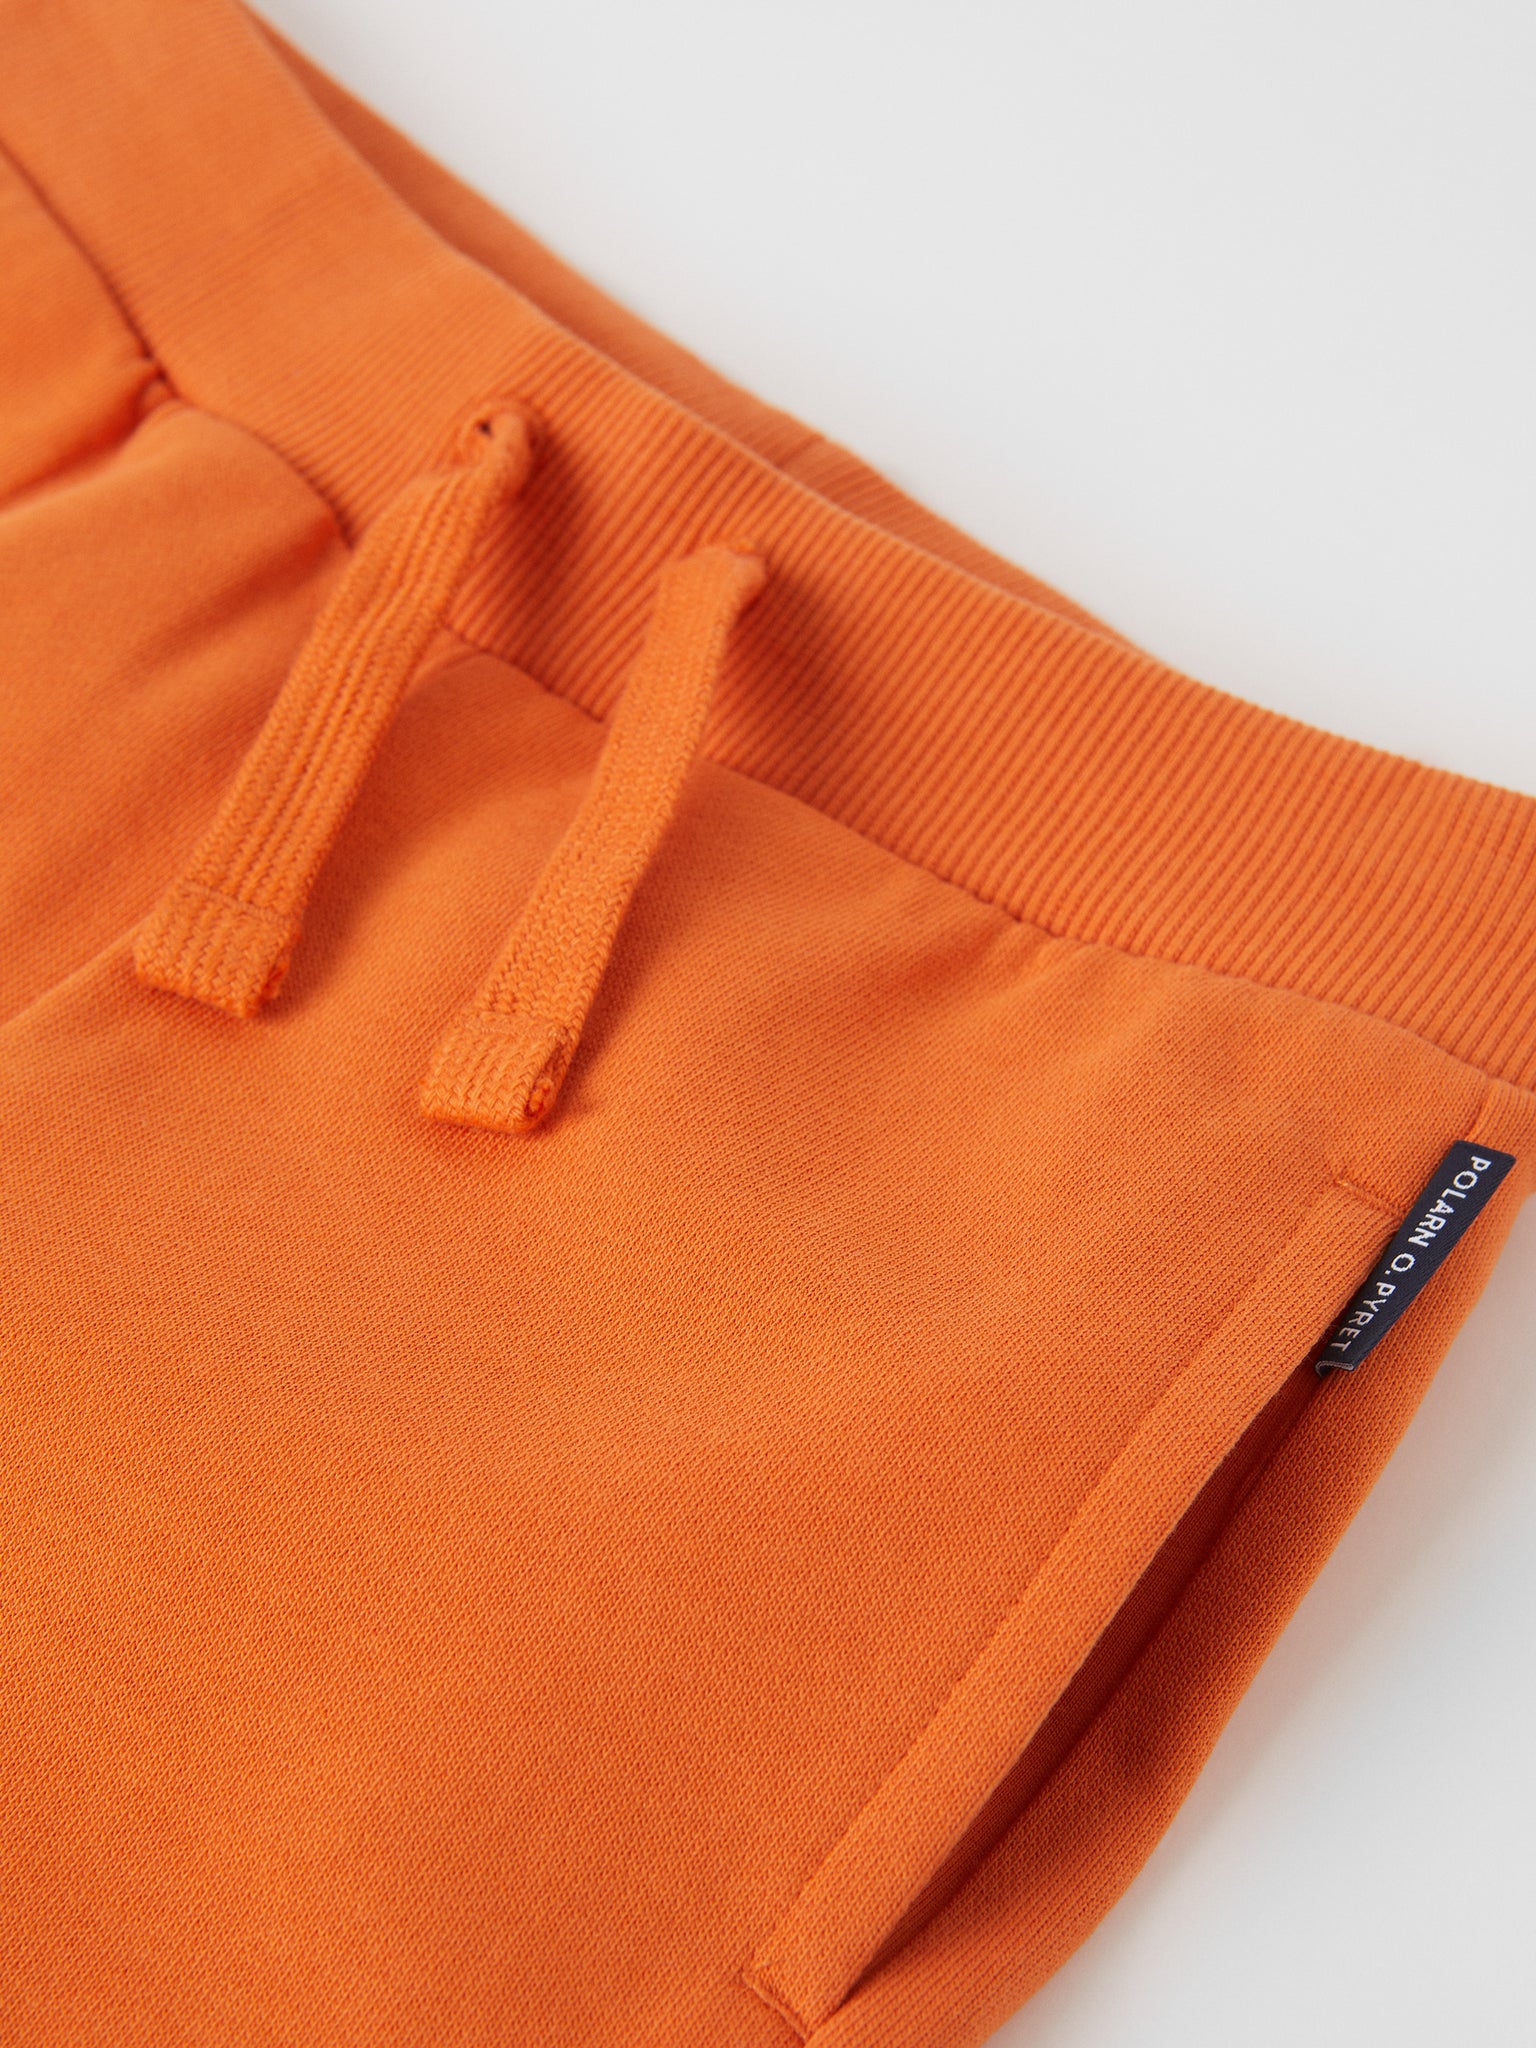 Organic Cotton Orange Kids Joggers from the Polarn O. Pyret kidswear collection. Made using 100% GOTS Organic Cotton